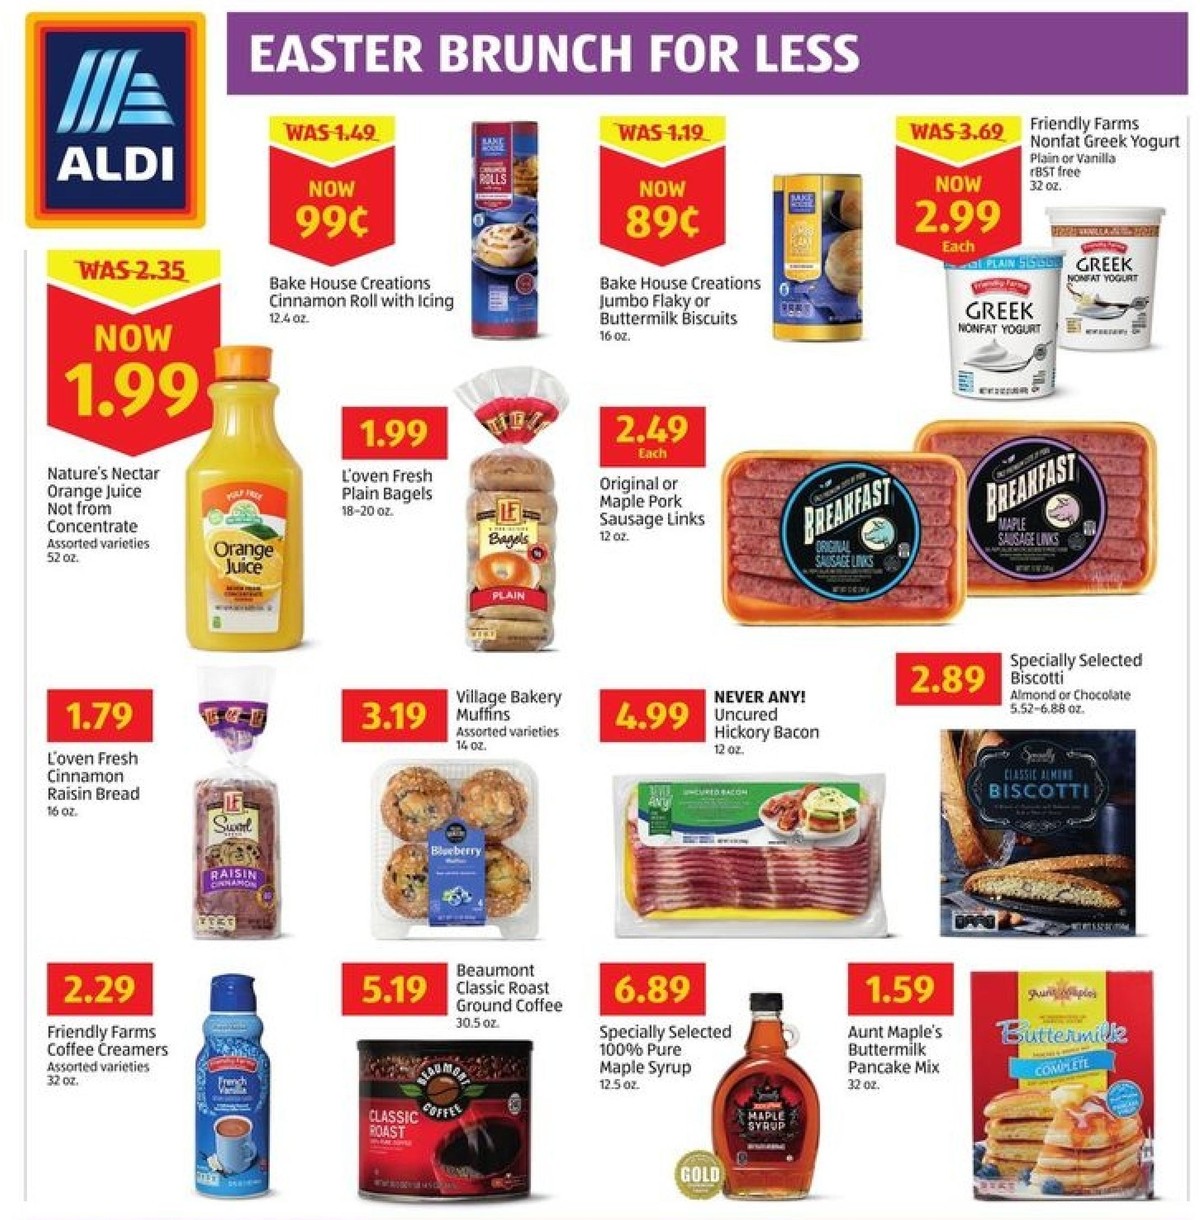 ALDI Weekly Ad from April 7